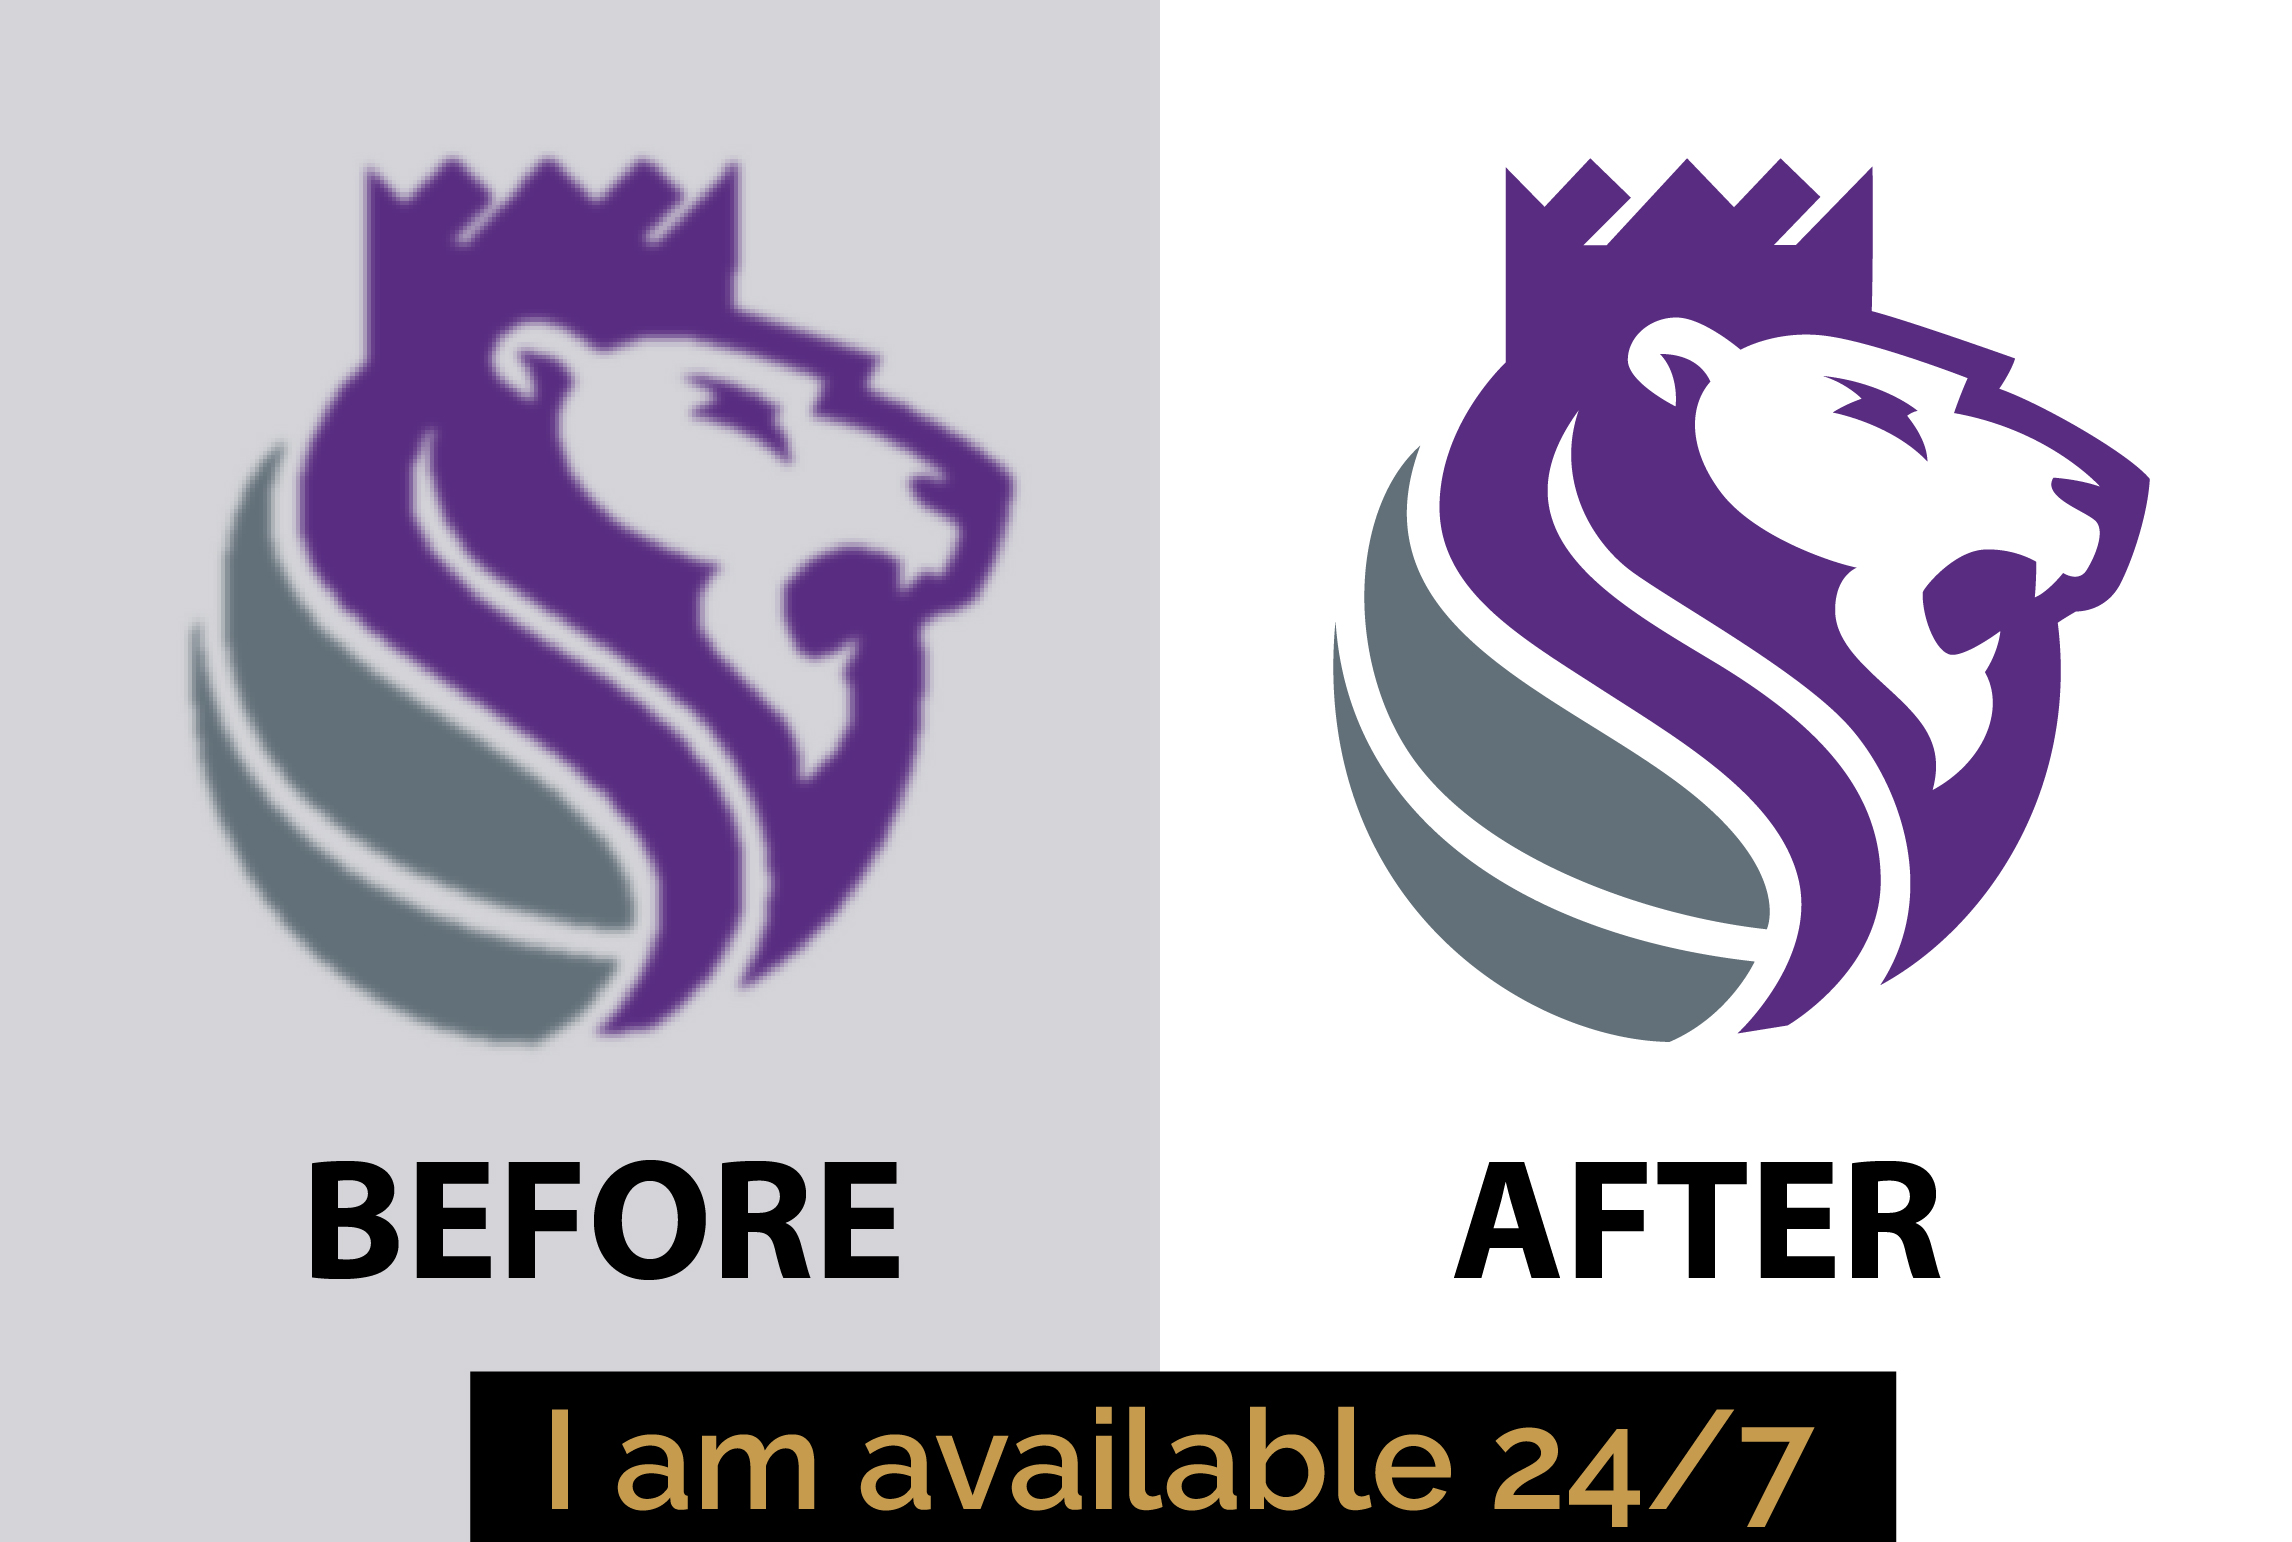 Vectorise or trace your logo to vector for $5 - SEOClerks